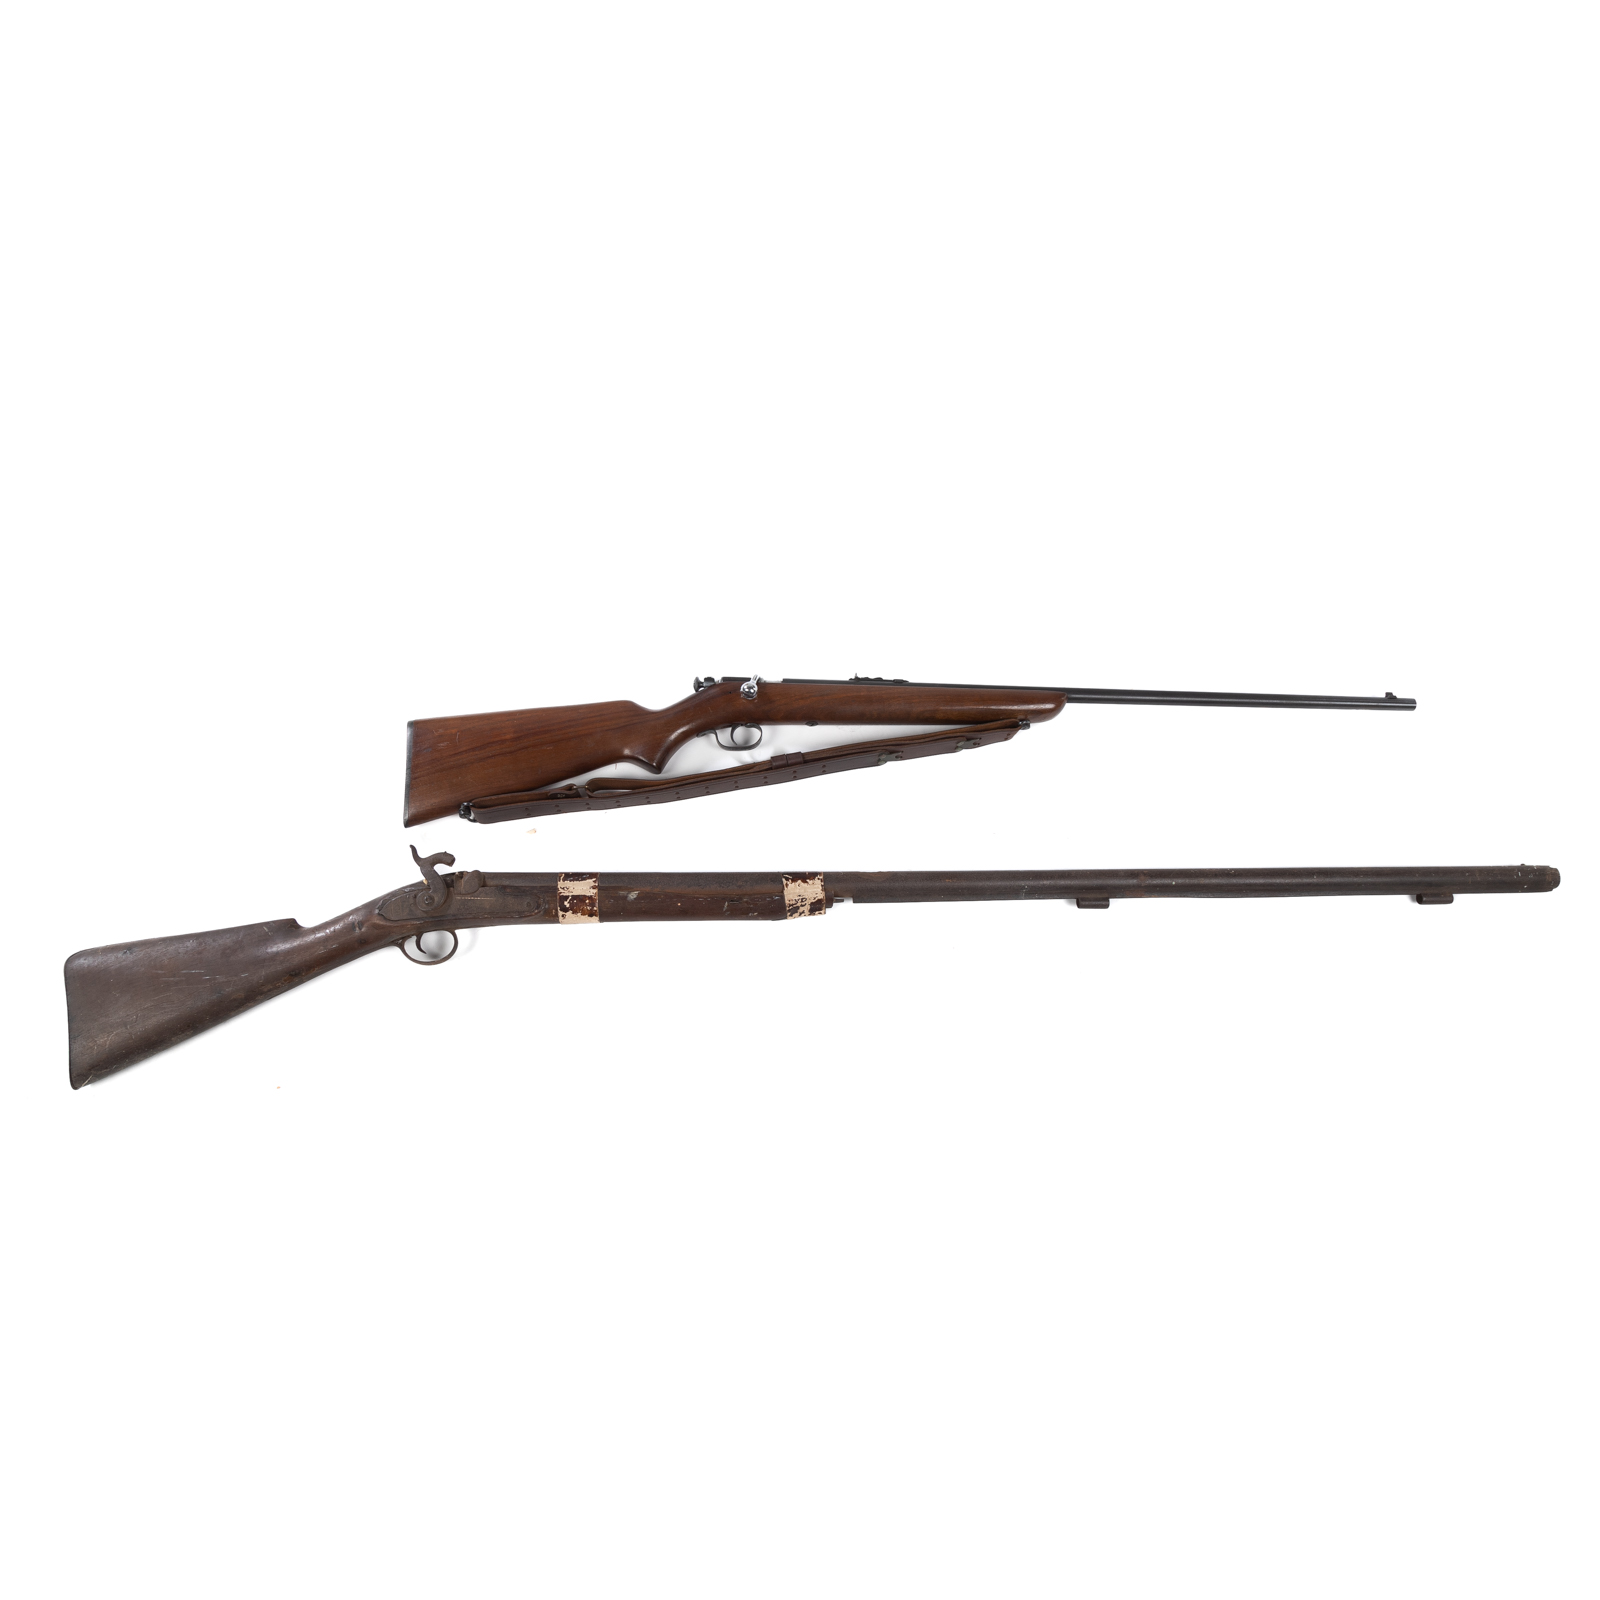 TWO WEAPONS Including a Winchester 2e904d